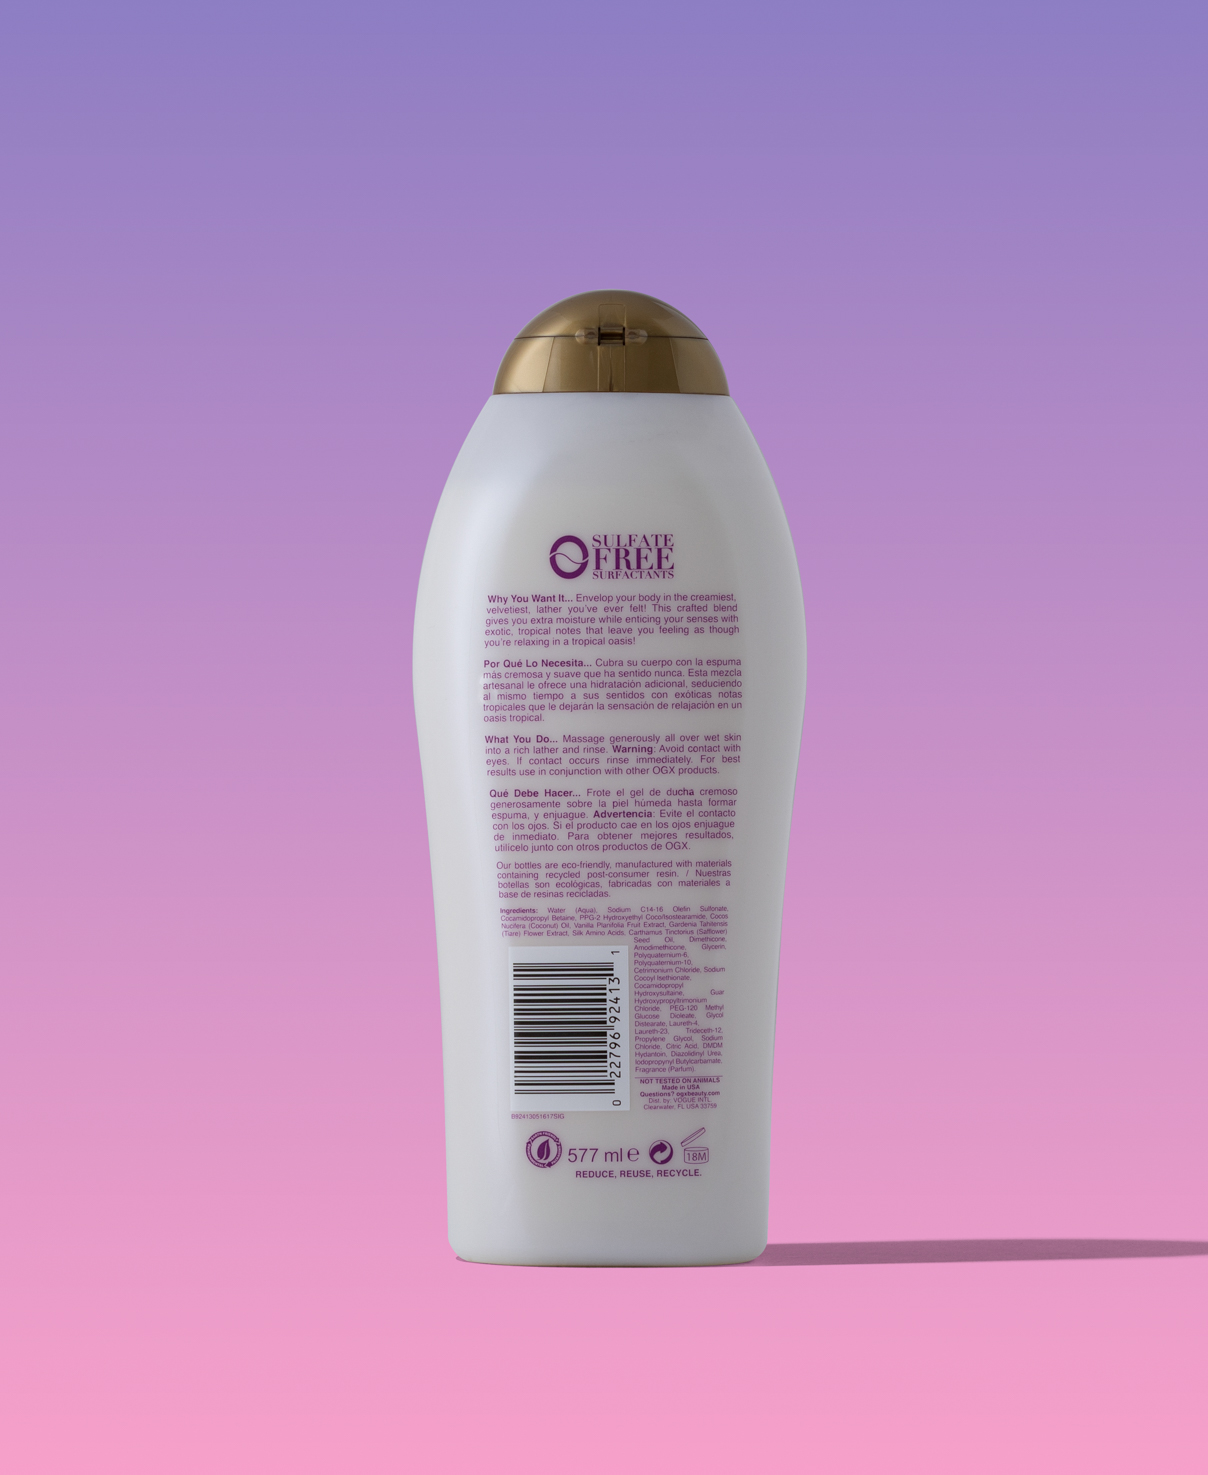 OGX Extra Creamy + Coconut Miracle Oil Ultra Moisture Body Wash